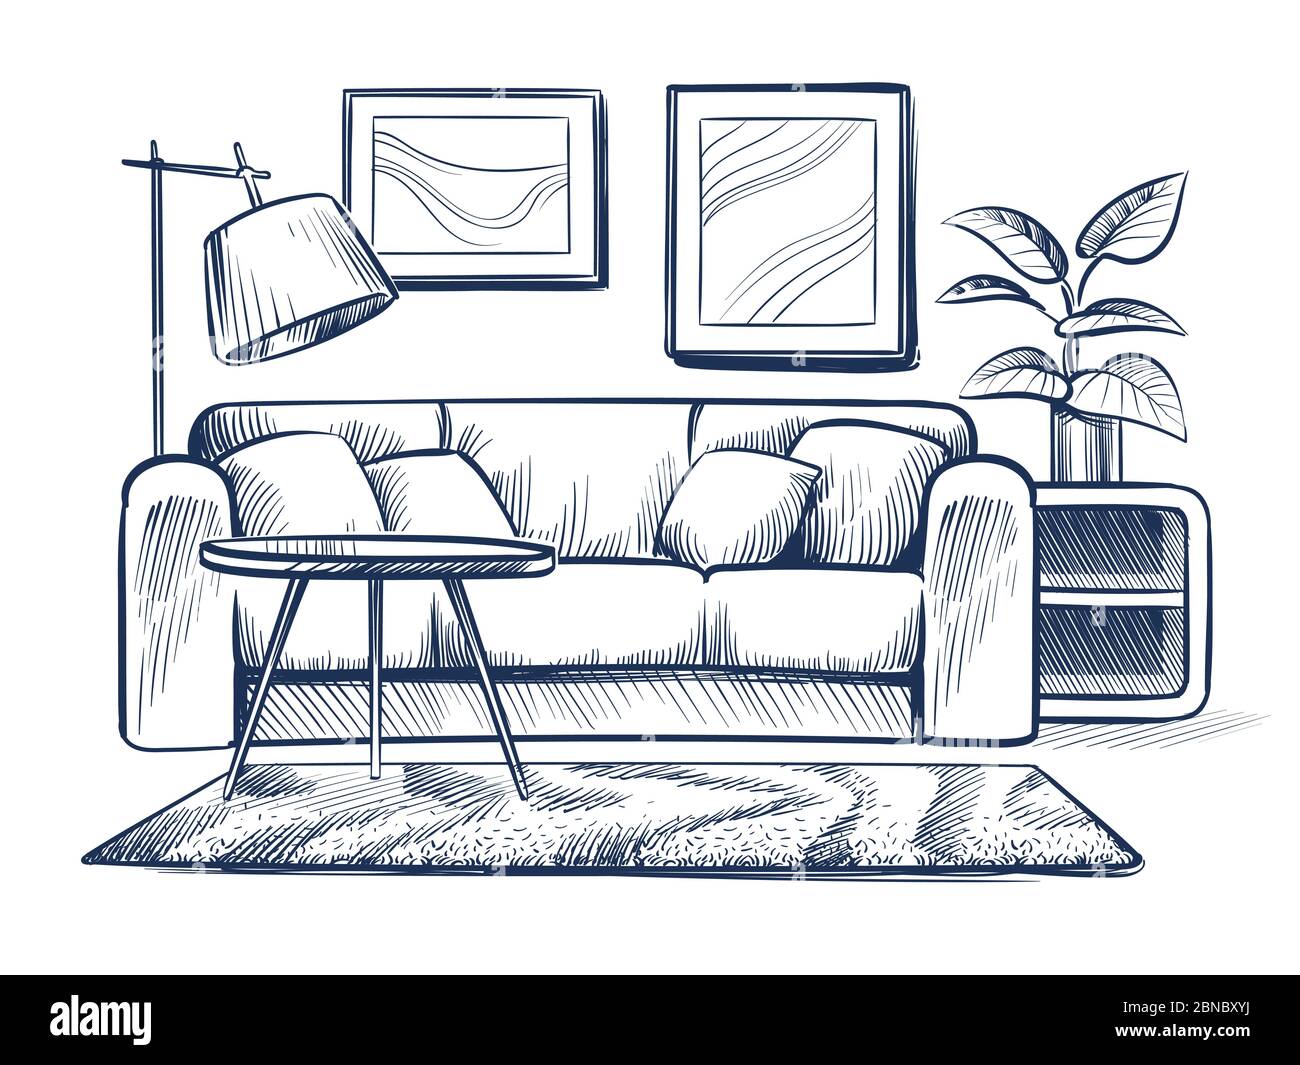 Sketch living room. Doodle house interior with couch, lamp and picture frames. Freehand drawing home black and white vector interior. Illustration of sketch room with furniture interior Stock Vector